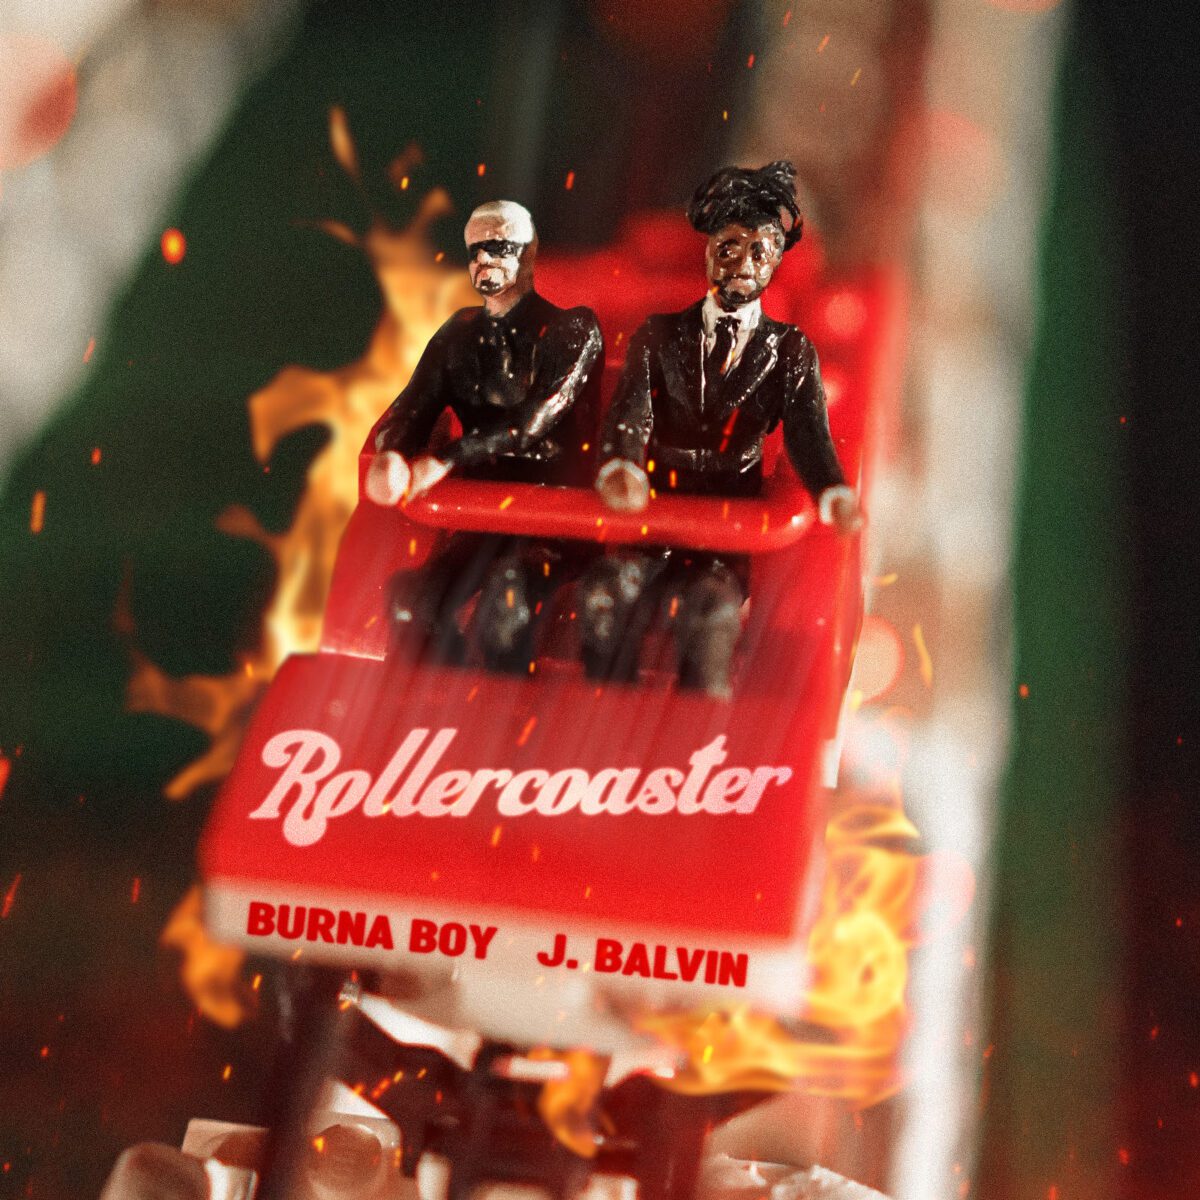 TMAQTALK VISUAL :BURNA BOY SHOWS ANEW PERSONA IN NEW VISUALS FOR ROLLERCOASTER FEATURING. J BALVIN